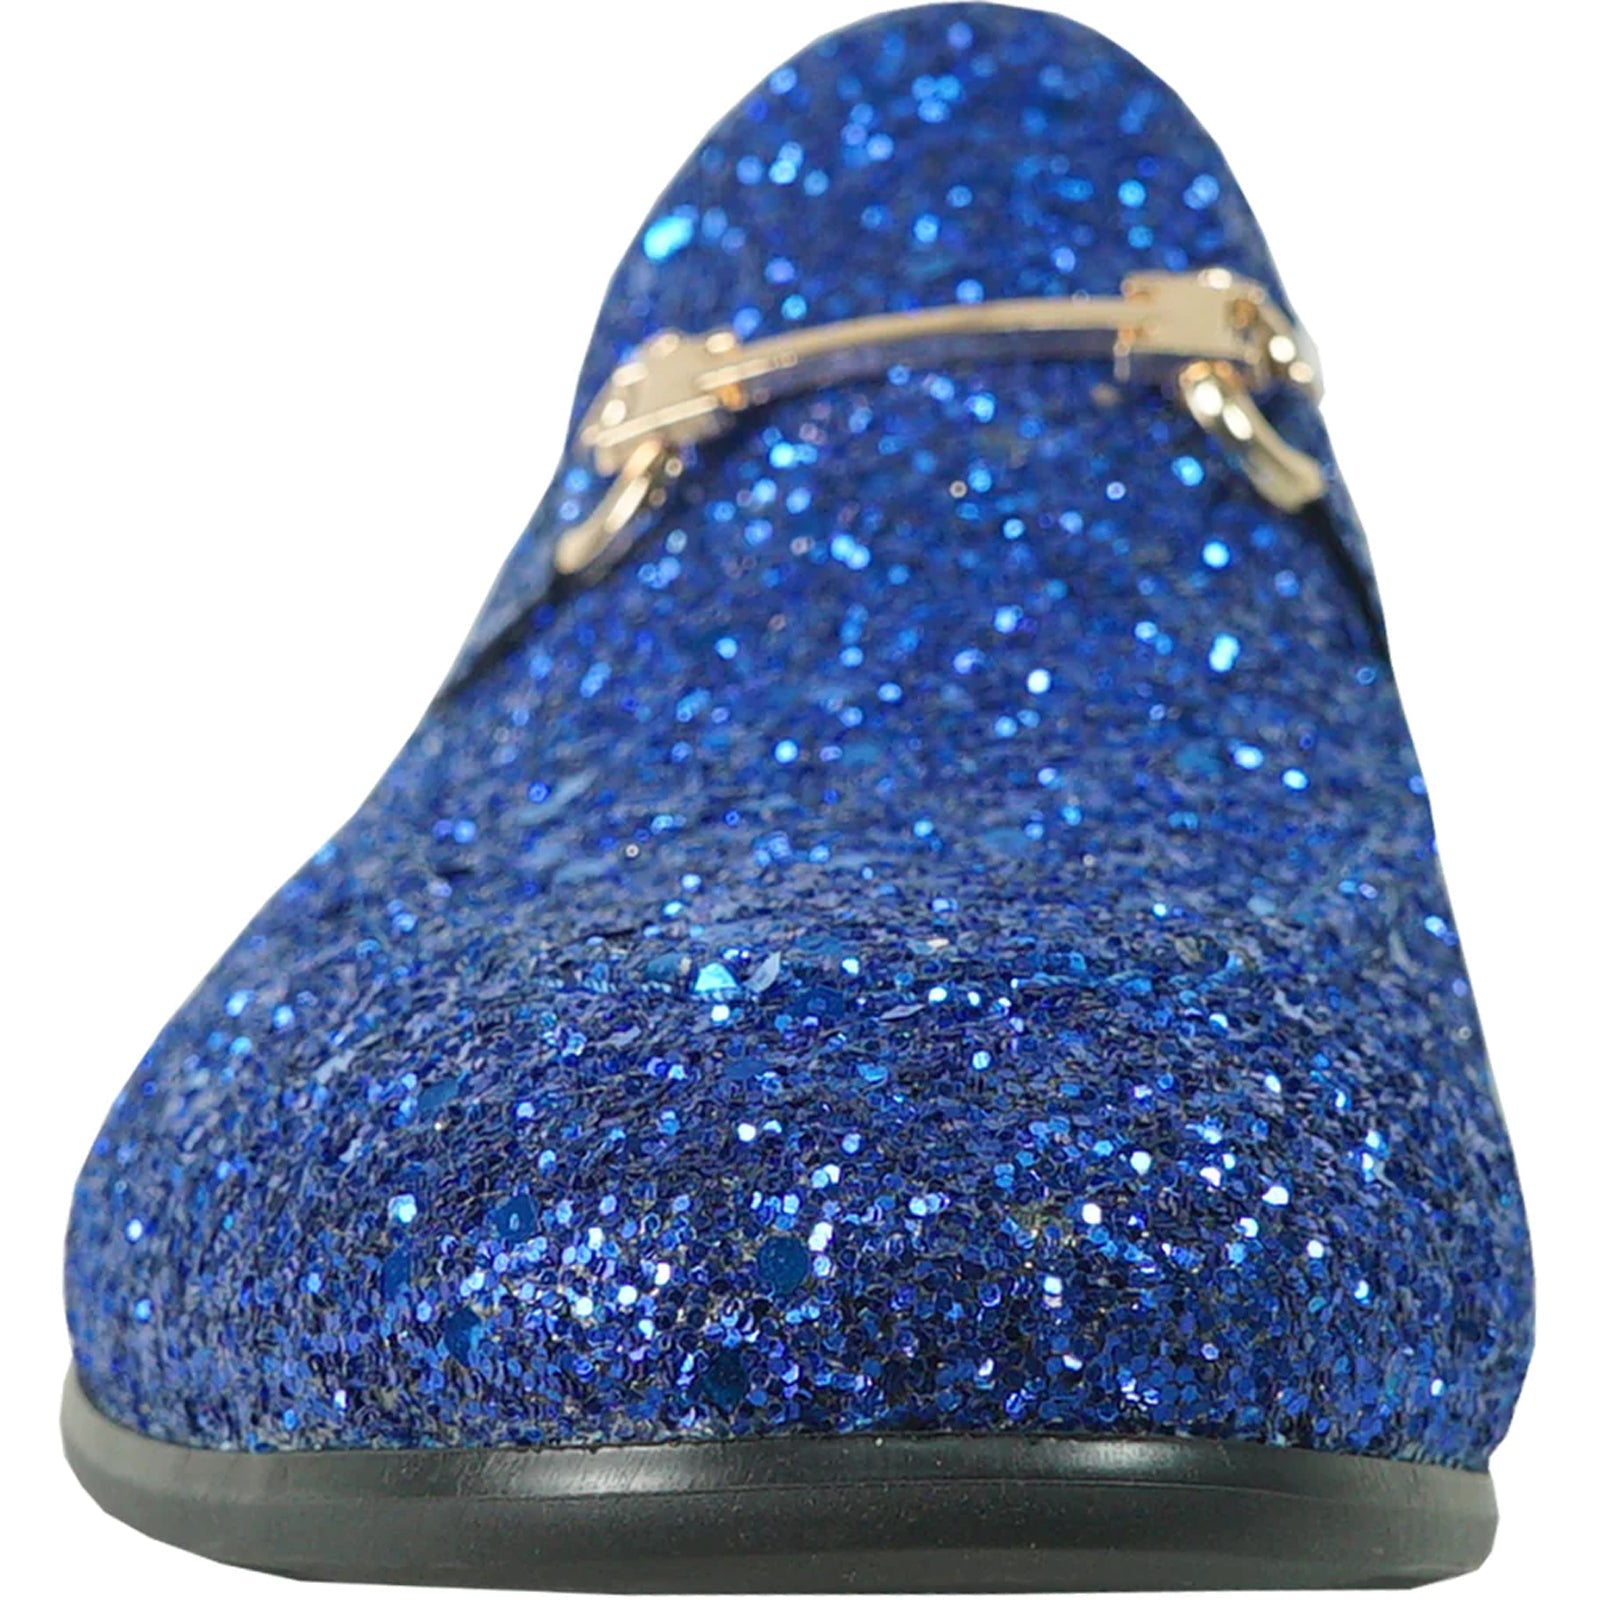 "Royal Blue Glitter Sequin Men's Prom Tuxedo Loafers with Buckle"